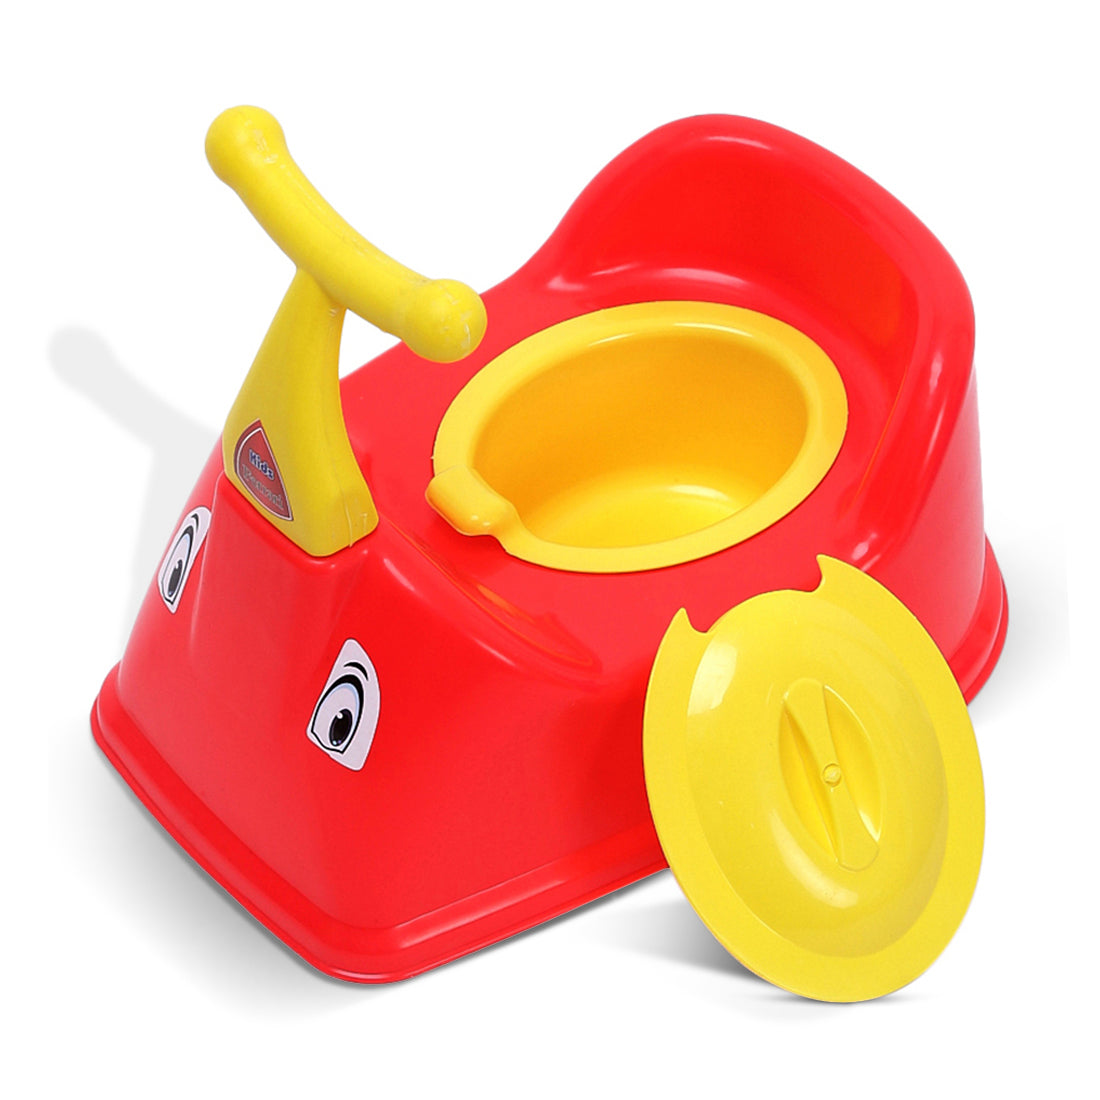 NHR Scooter Style Potty Trainer Seat (Choose Any Color)